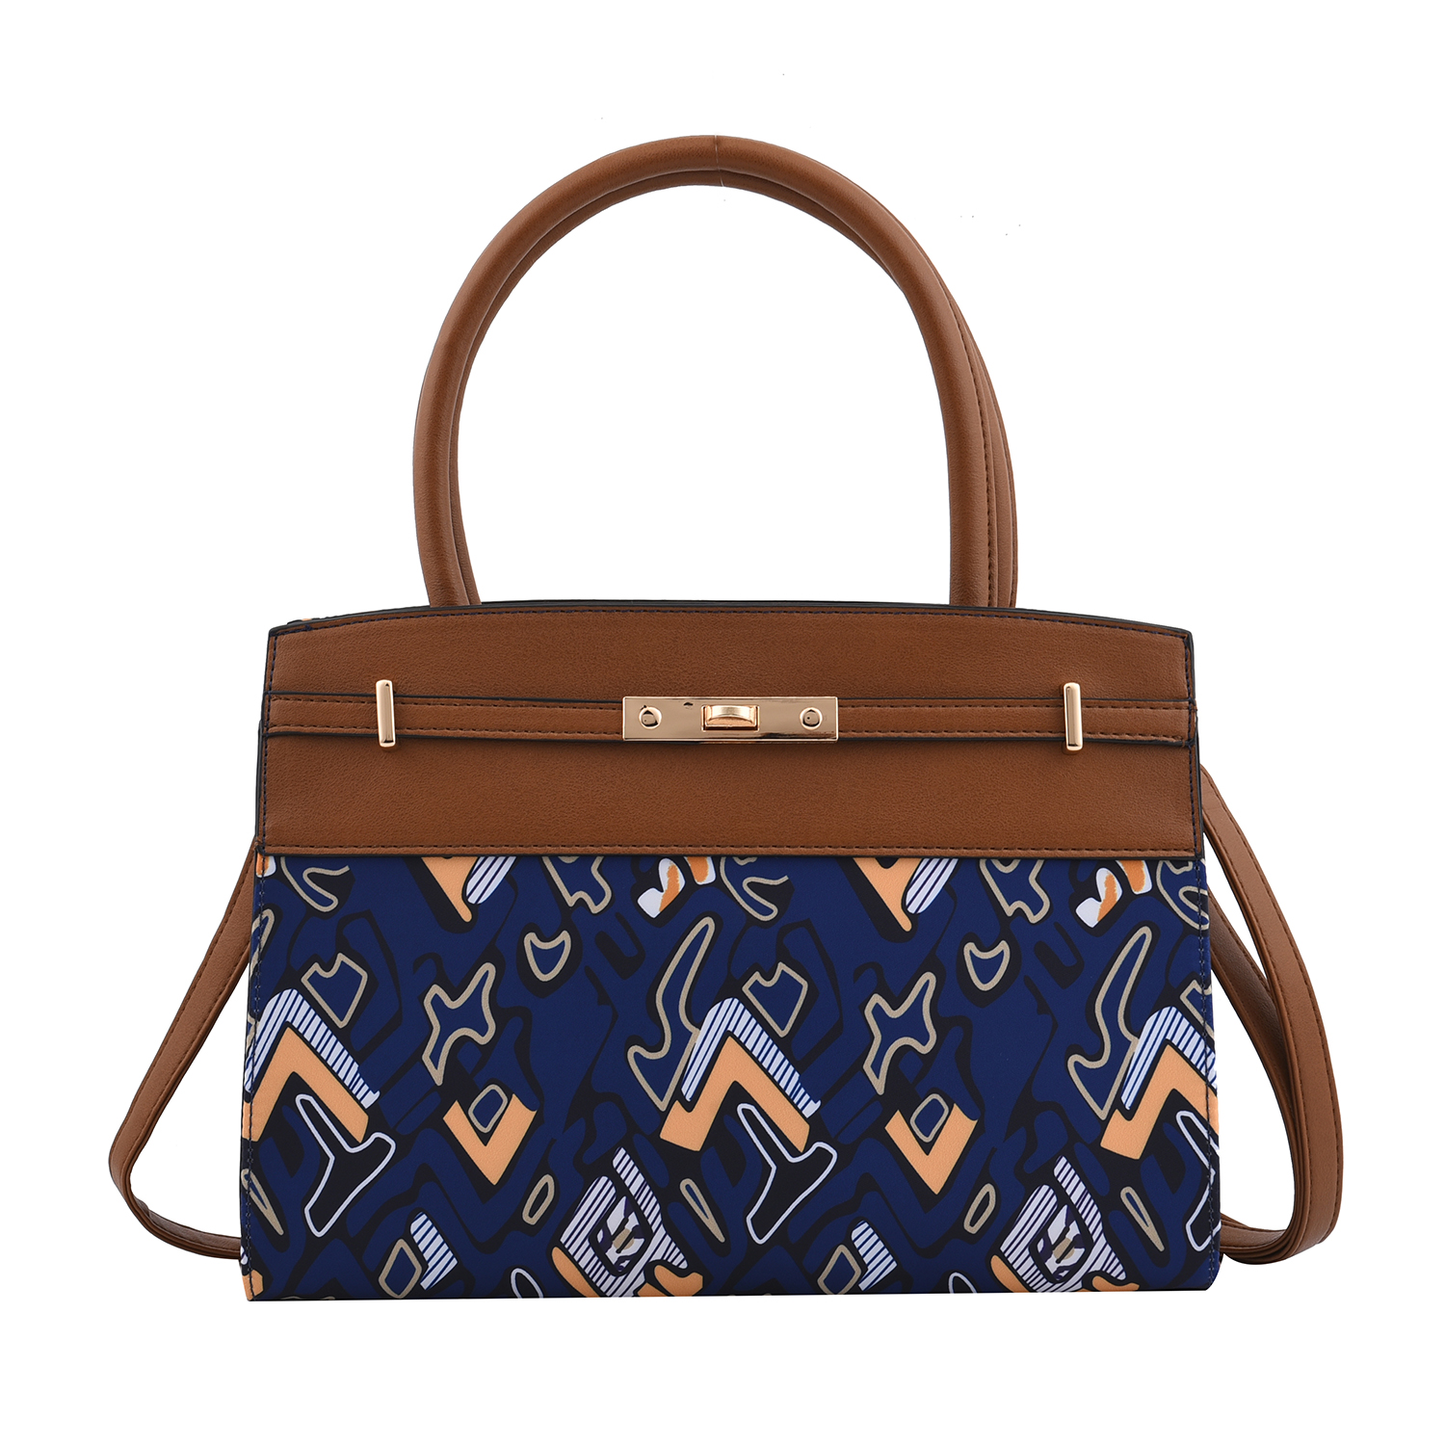 Brown and Blue Faux Leather Tote Bag and Clutch